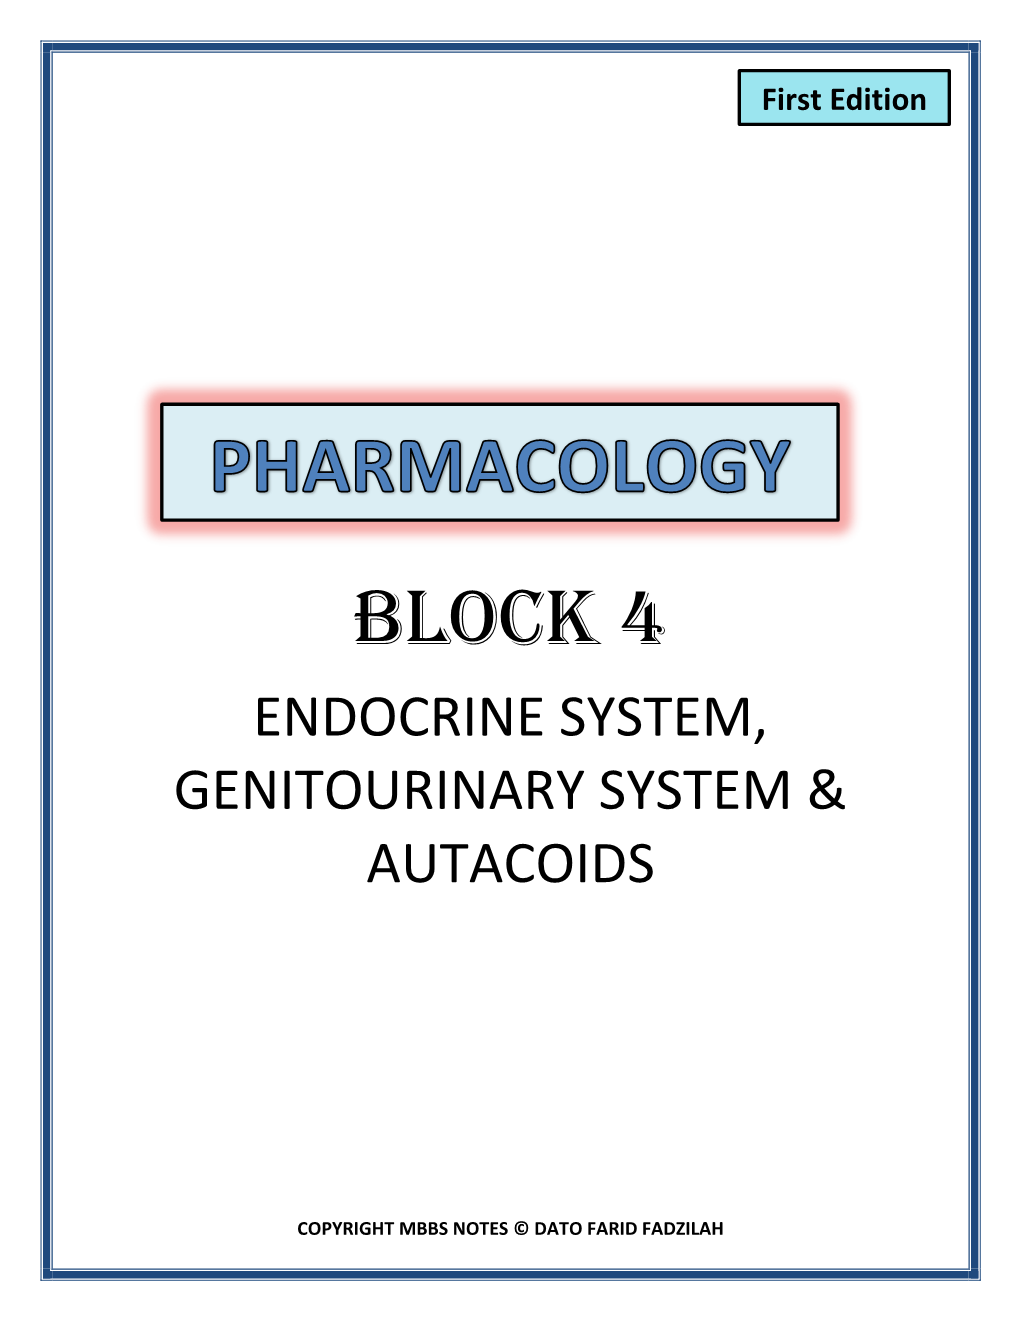 Block 4 Endocrine System, Genitourinary System & Autacoids